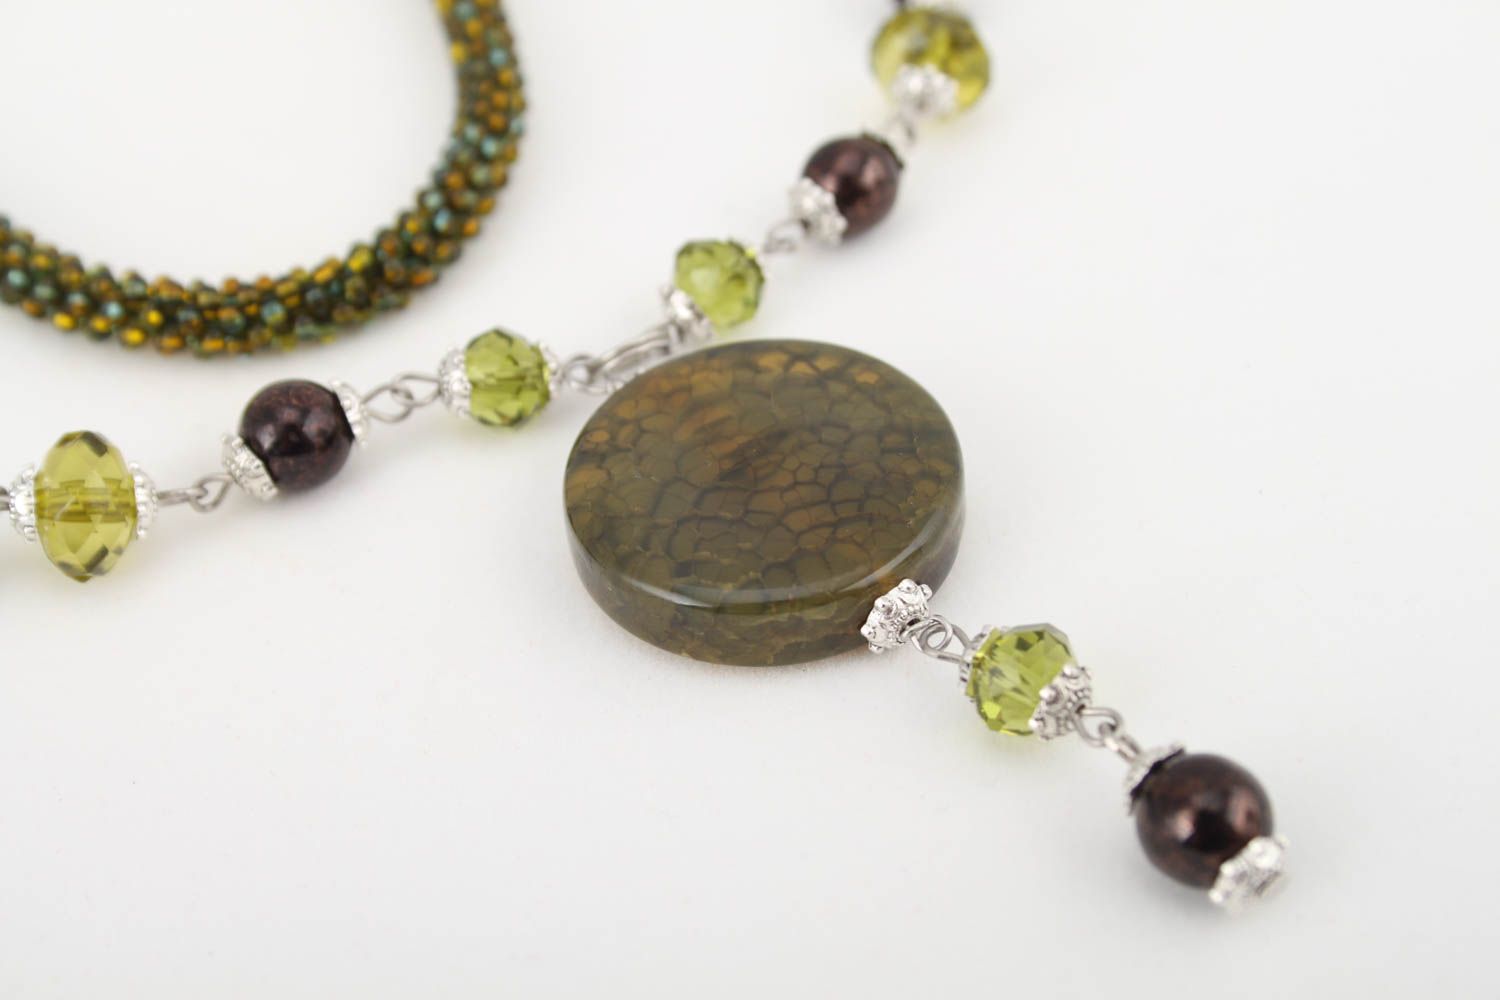 Handmade beaded necklace handmade necklace with natural stones fashion jewelry photo 2